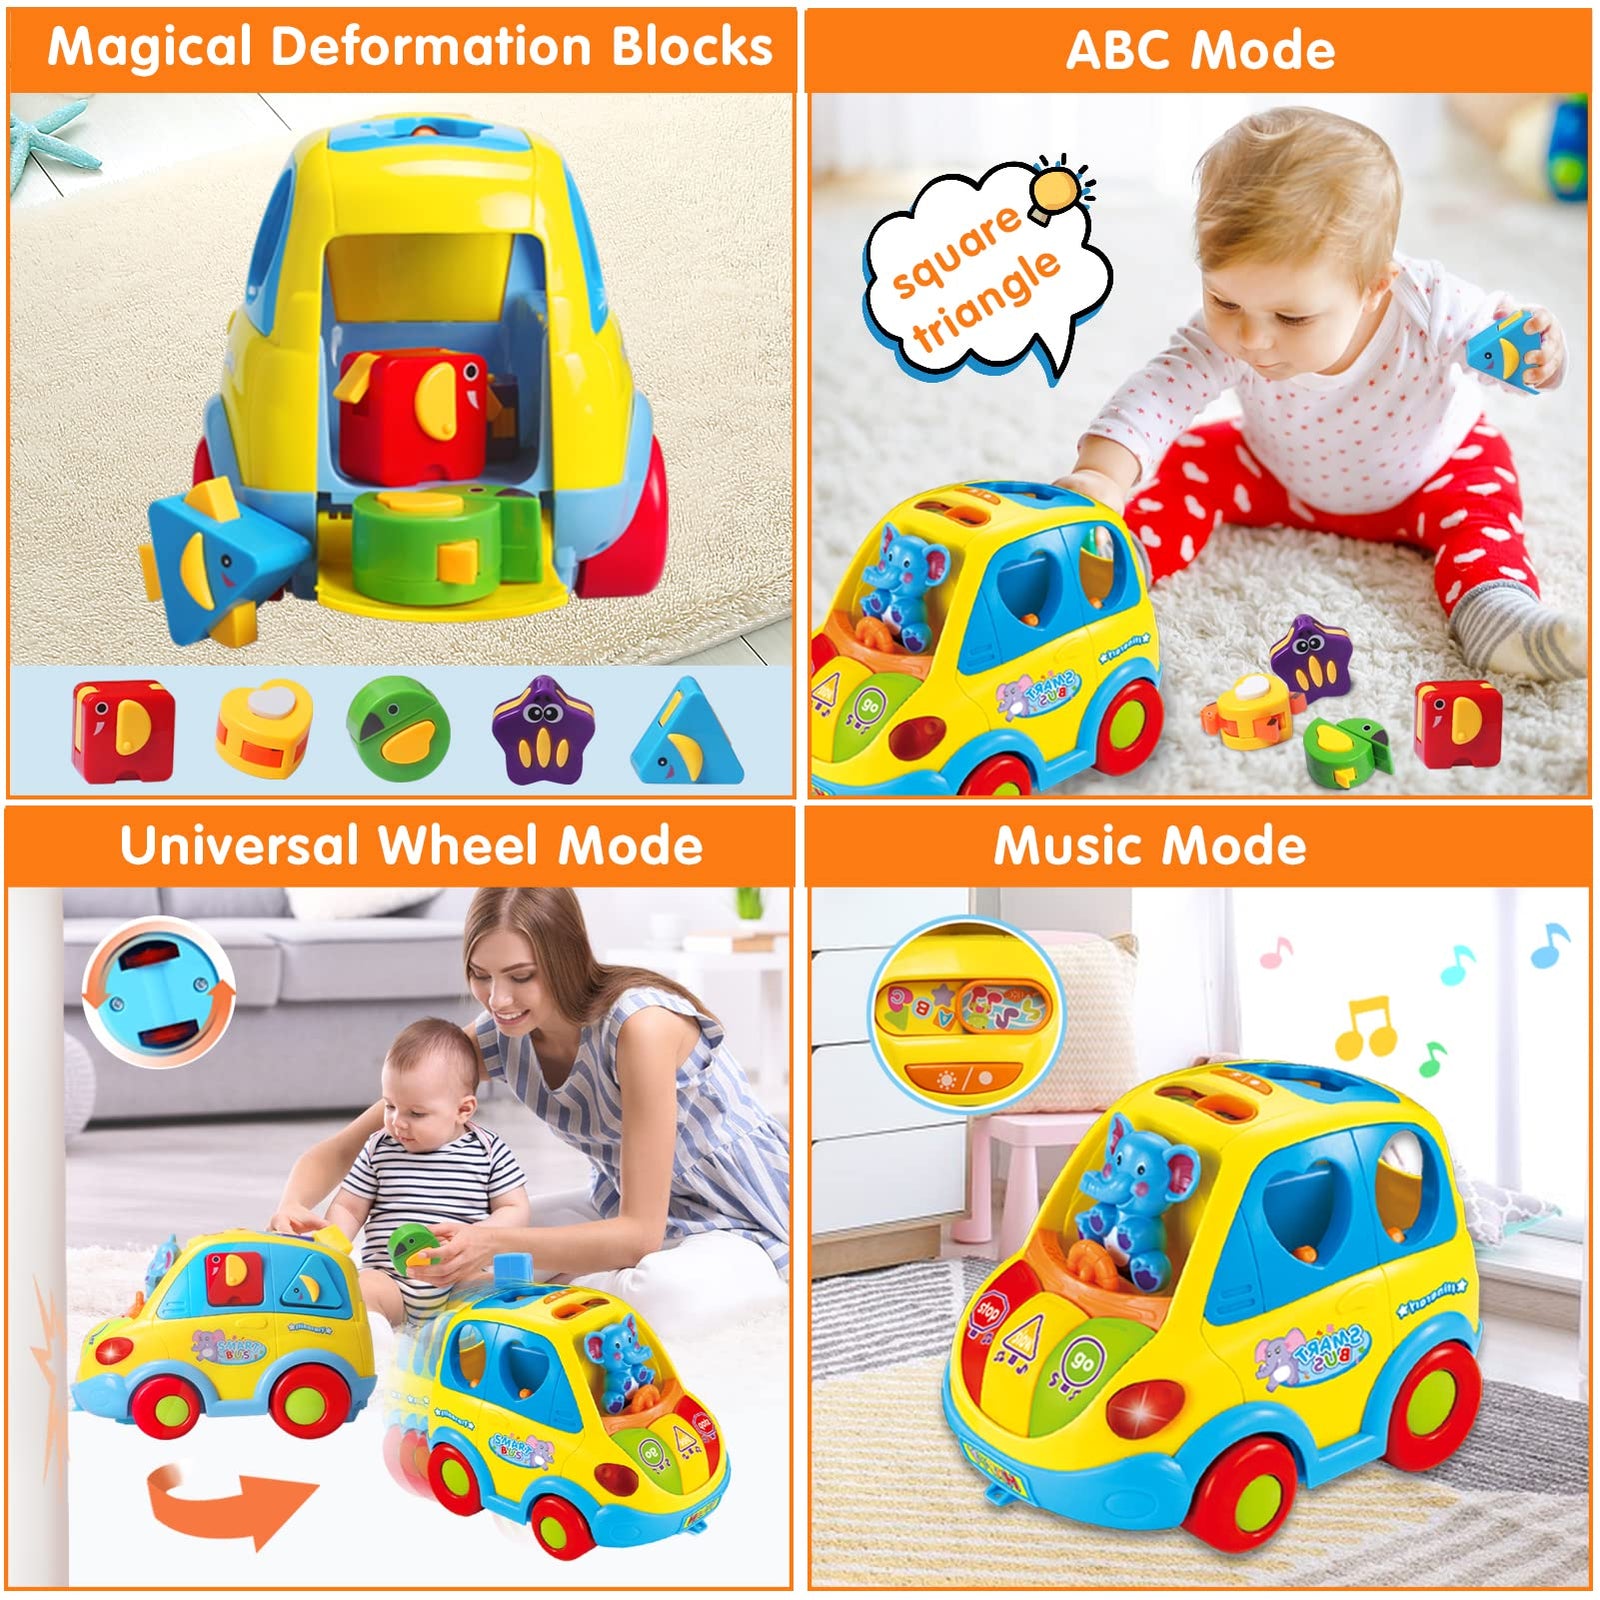 DUMMA Baby Toys 12-18 Months Musical Bus Toys for 1 2 3 4+Year Old Boys Girls Gifts,Early Education Learning Toy with Fruit/Music/Lighting/Smart Shapes for 18-24 Months Birthday Gifts